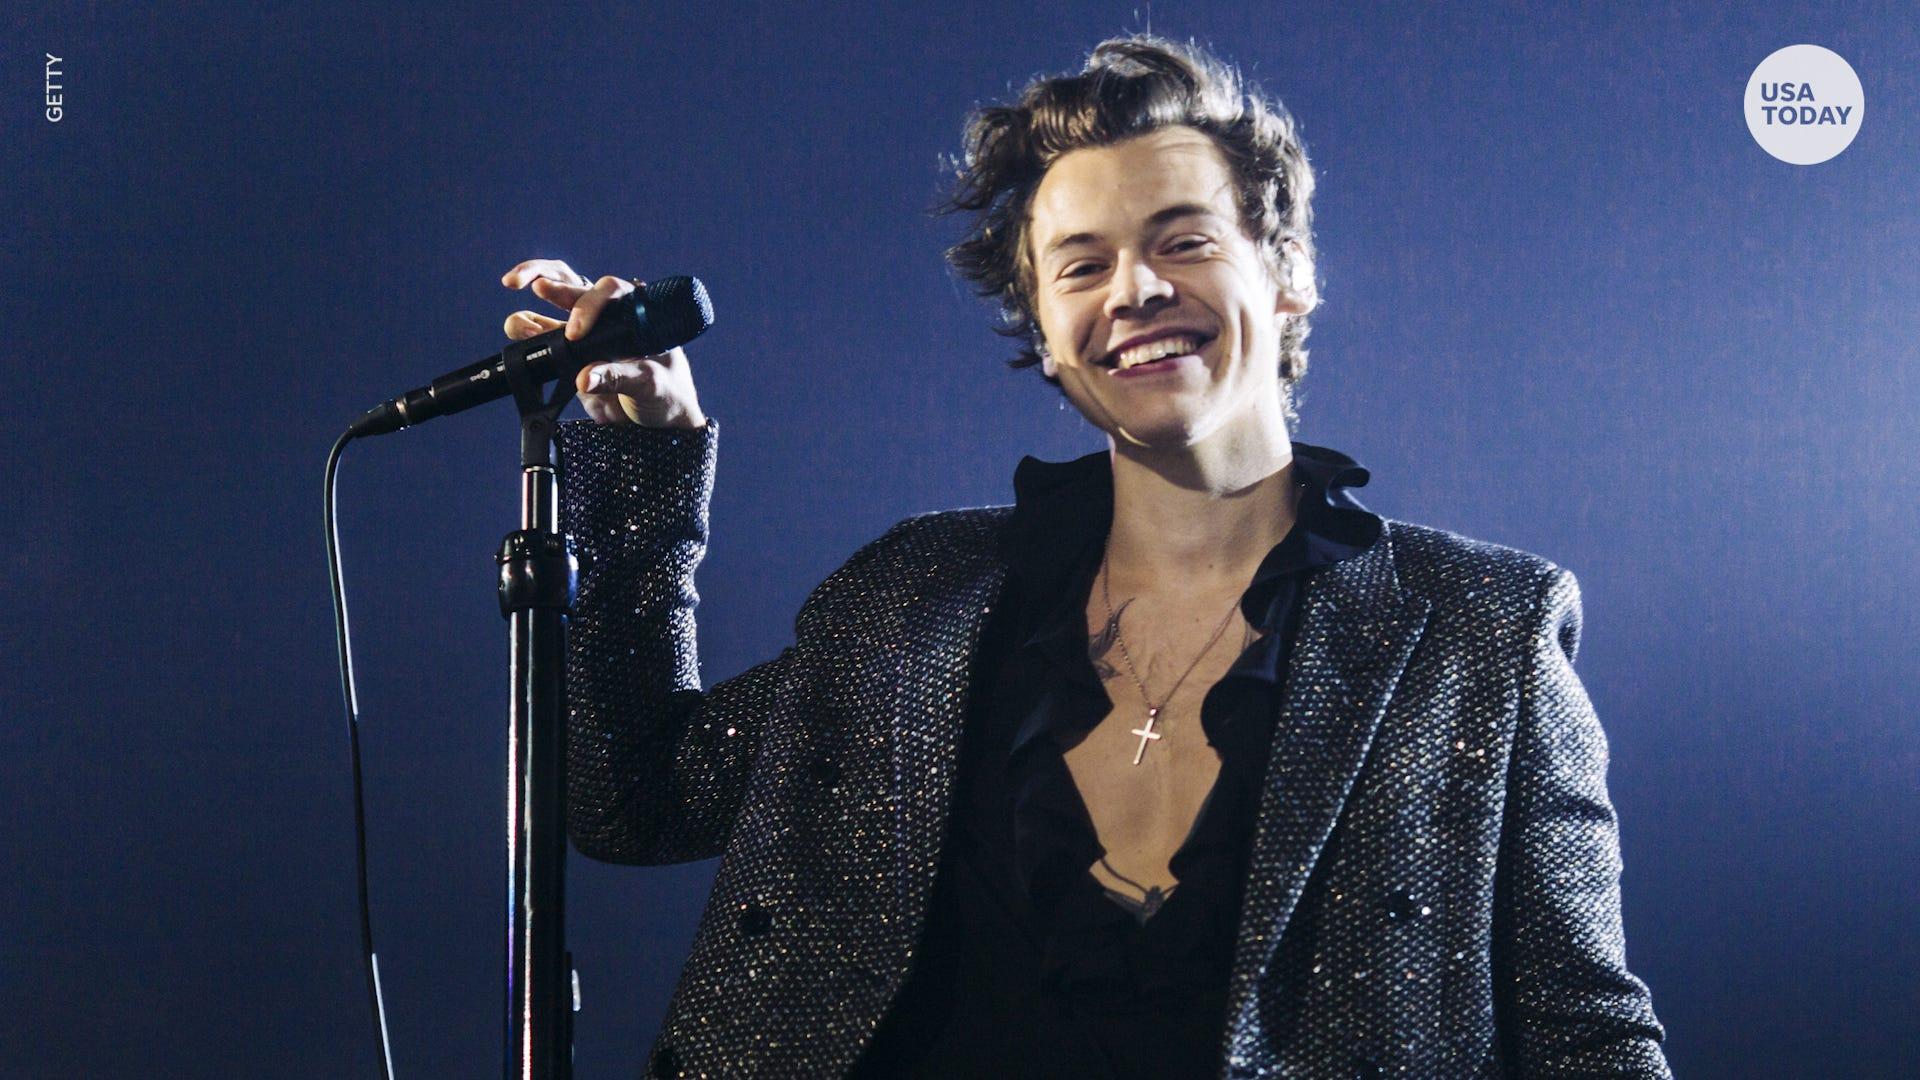 Harry Styles' shirtless Rolling Stone cover has fans hyperventilating